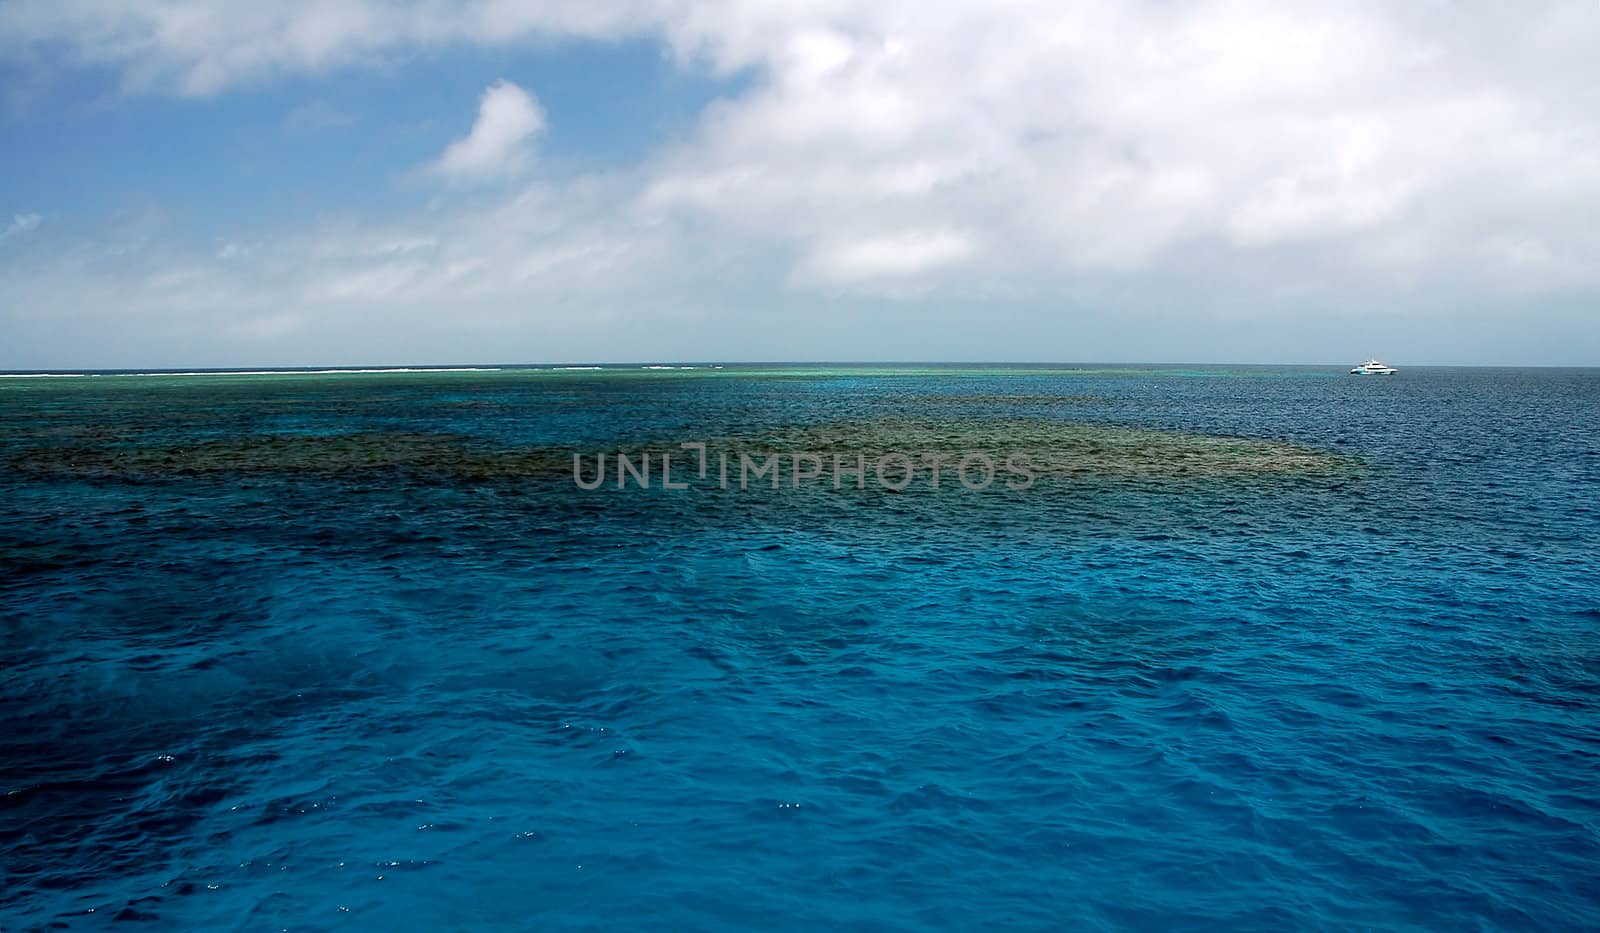 blue calm sea, coral reef, small white boat in background